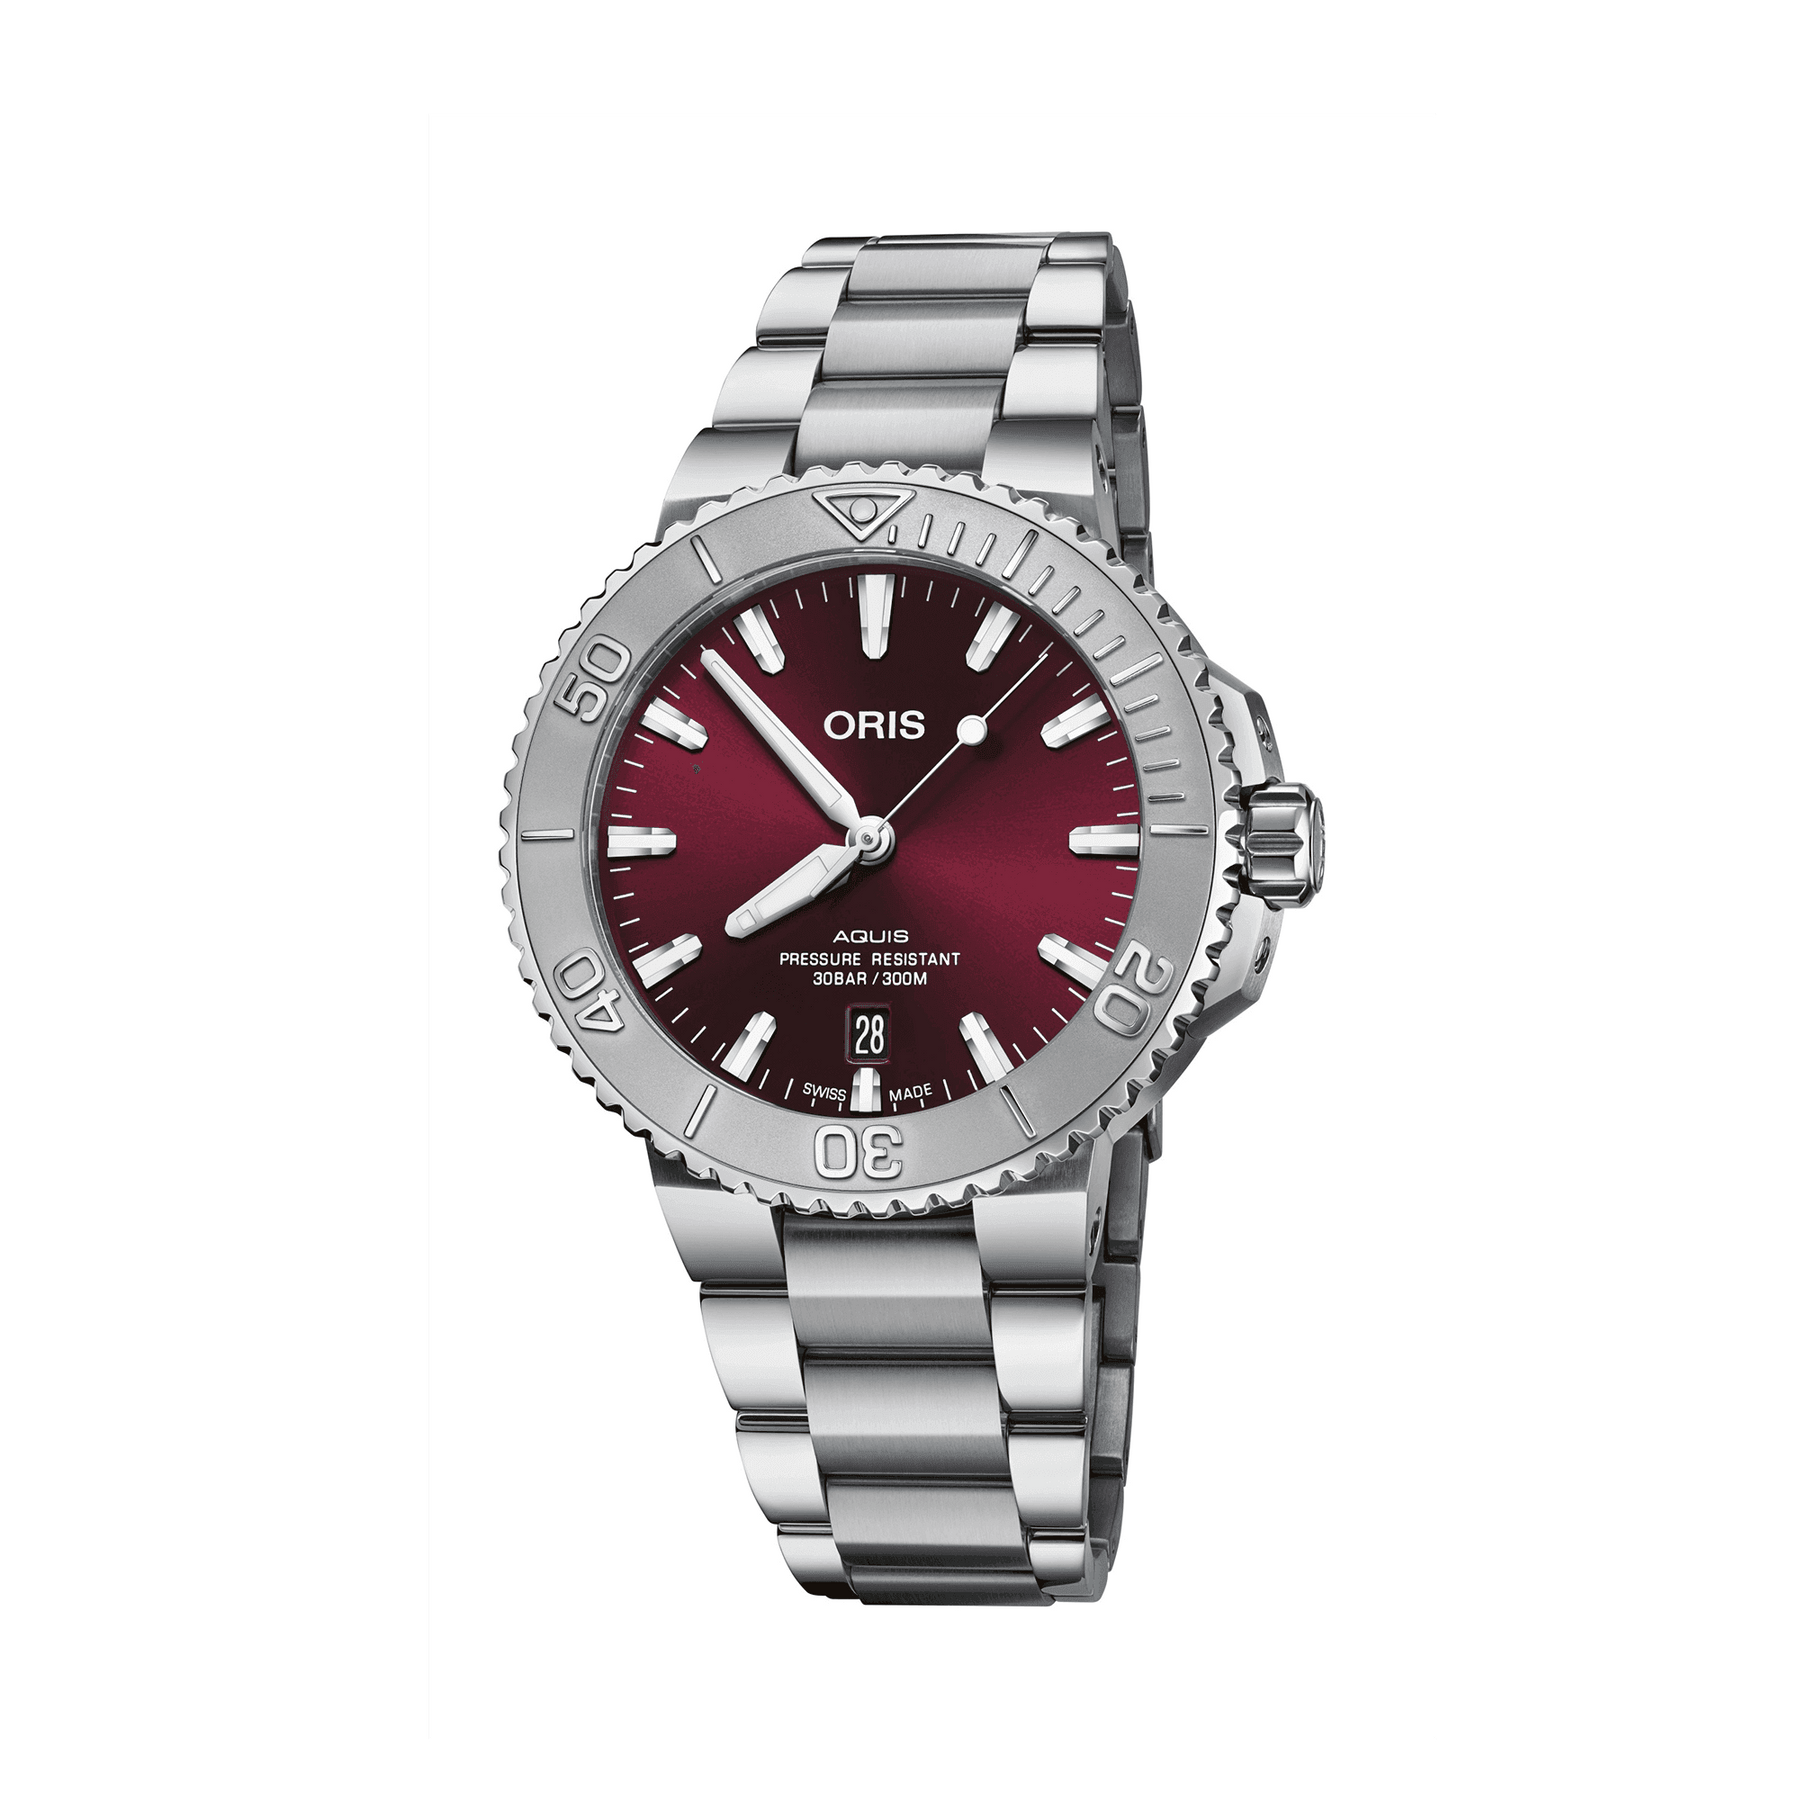 Oris Aquis Men's 41.5mm Stainless Steel Automatic Watch 733 7766 4158 MB - Wallace Bishop